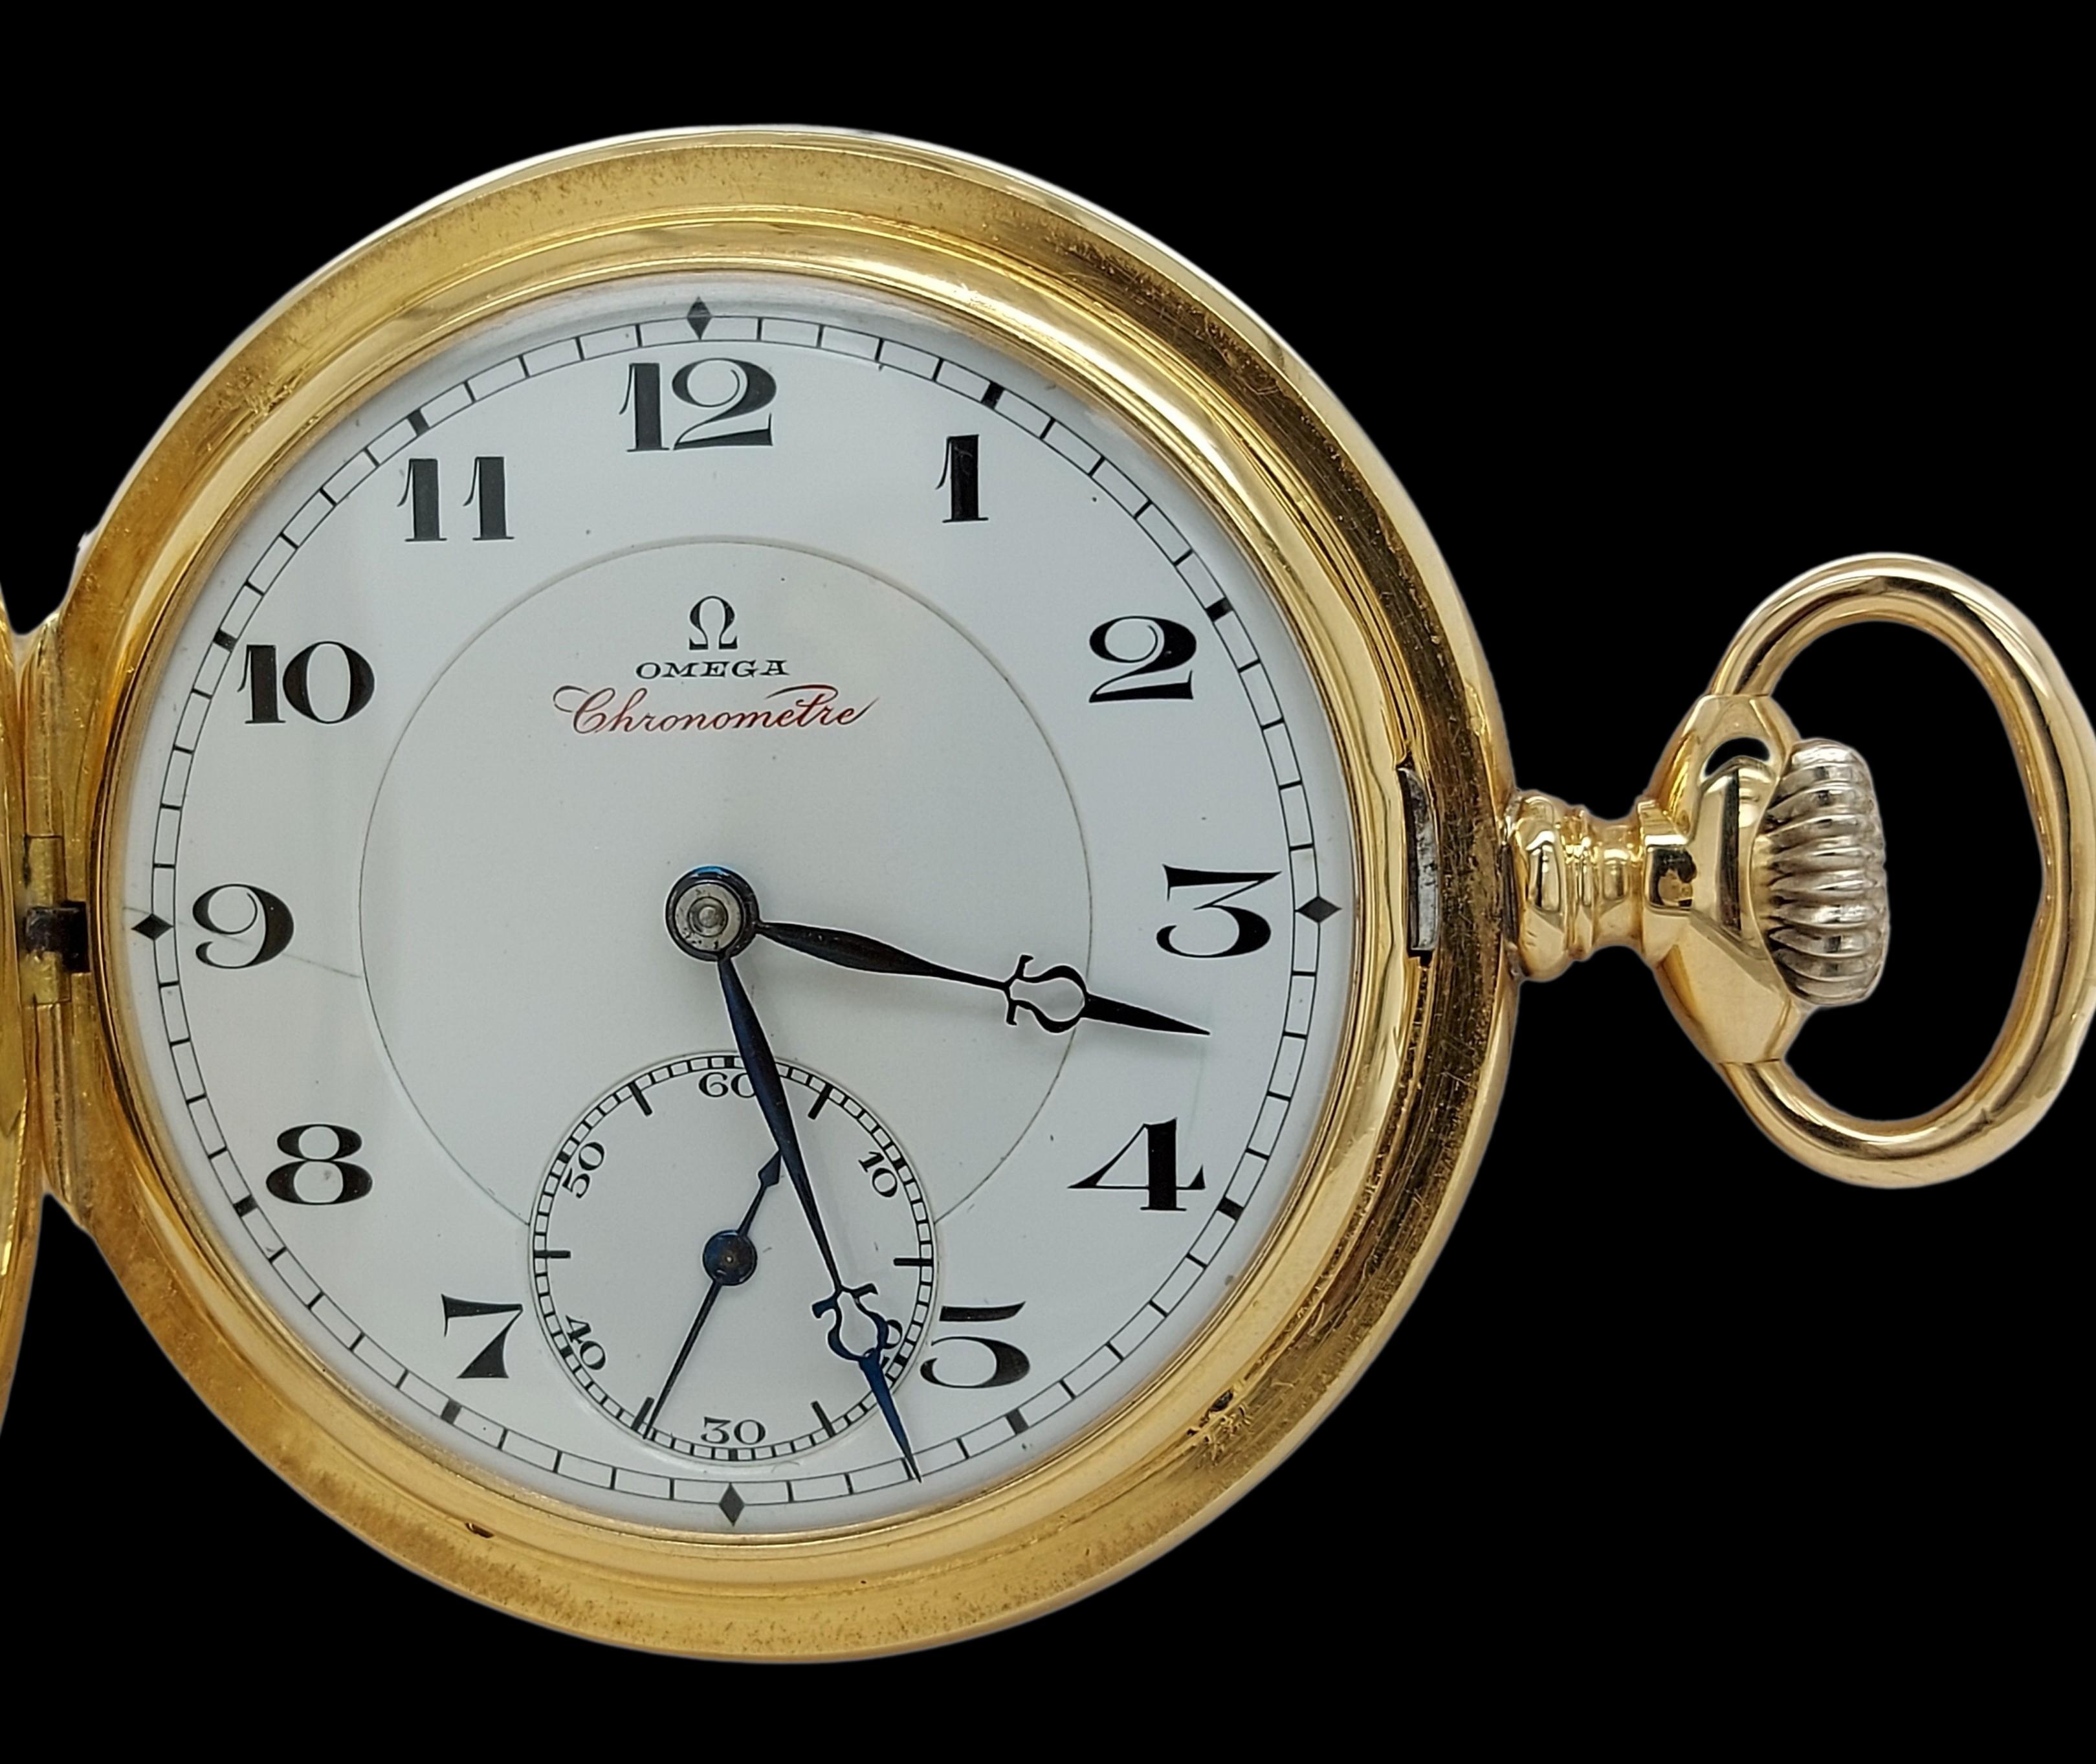 Extremely Rare & Collectable Limited 18kt Yellow Gold Omega Chronometre pocket watch, Grade Very Best , calibre 43.15 S, “Grade Very Best

Movement: Manual winding, “Chronometer” quality

Case: 18kt Yellow gold case with diameter 52 mm, thickness 12